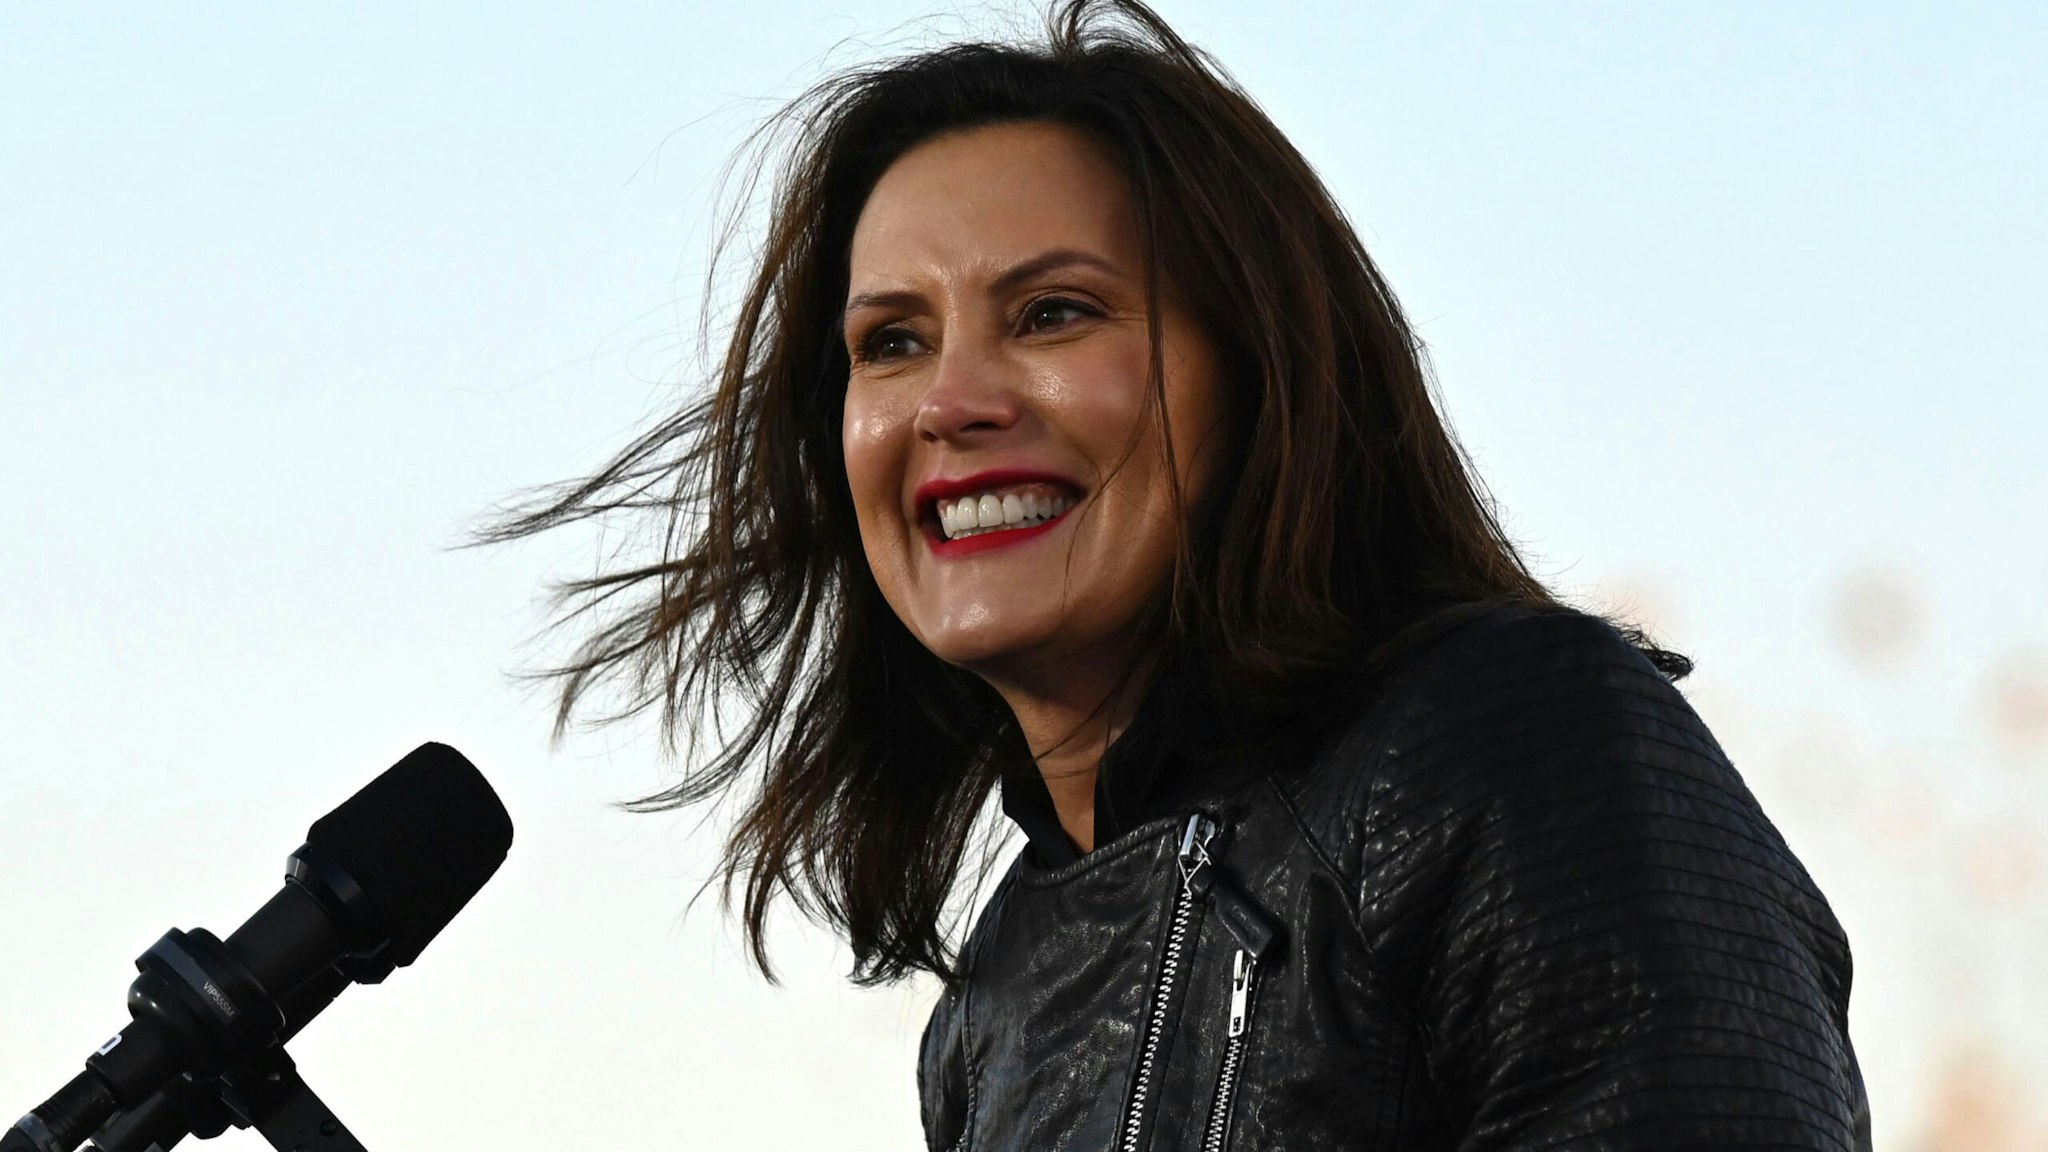 Michigan Governor Gretchen Whitmer speaks during a mobilization event at Belle Isle Casino in Detroit, Michigan, with former US President Barack Obama and Democratic Presidential candidate and former US Vice President Joe Biden, on October 31, 2020.